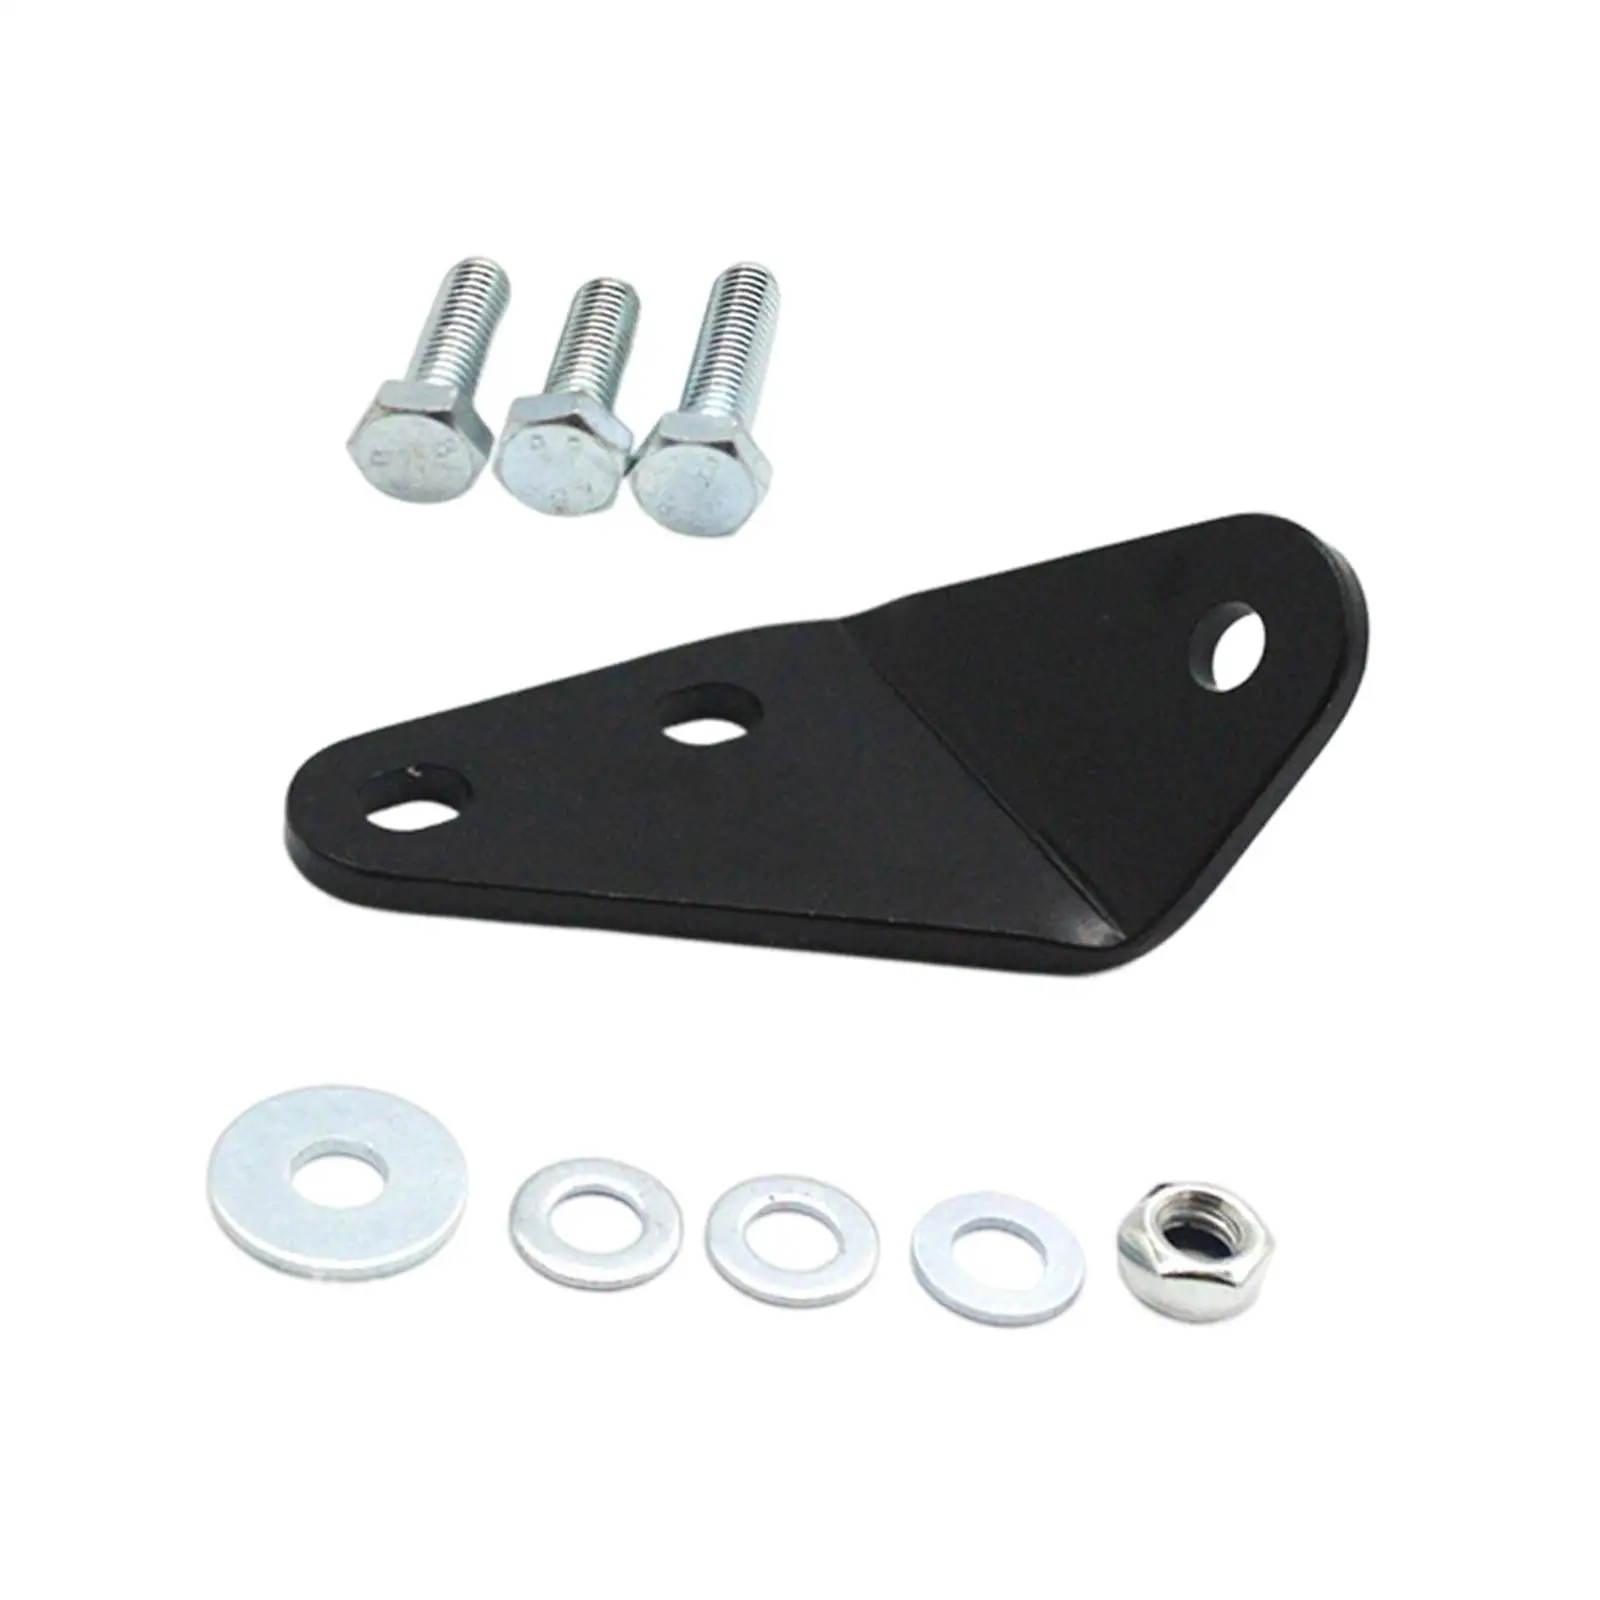 Clutch Pedal Repair Bracket Kit Sturdy Replace Parts for Volkswagen T4